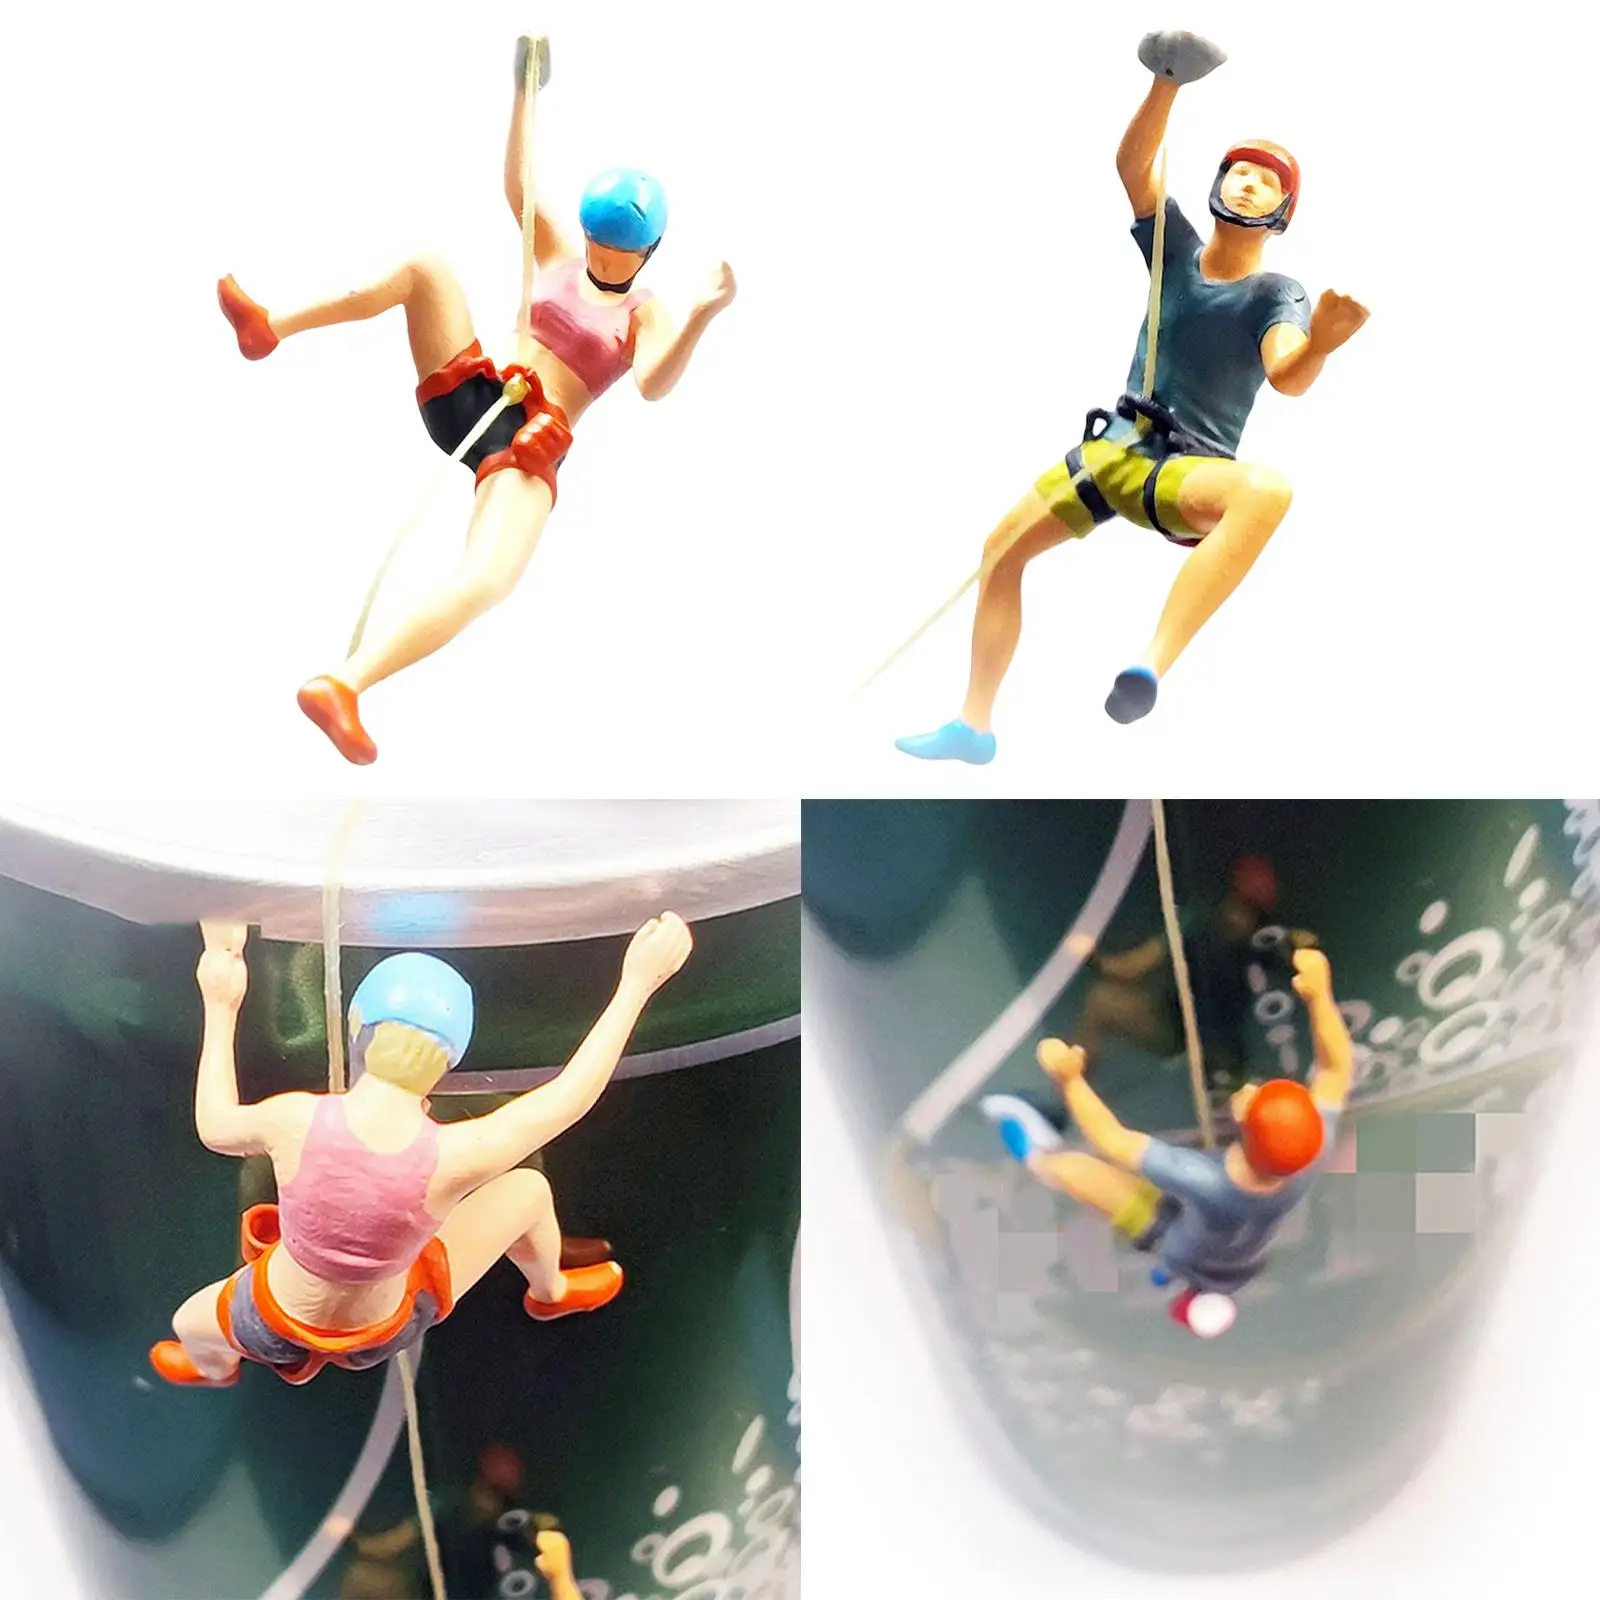 1/87 Painted Figures Simulation Miniature Toy Action Figure Character Model Role